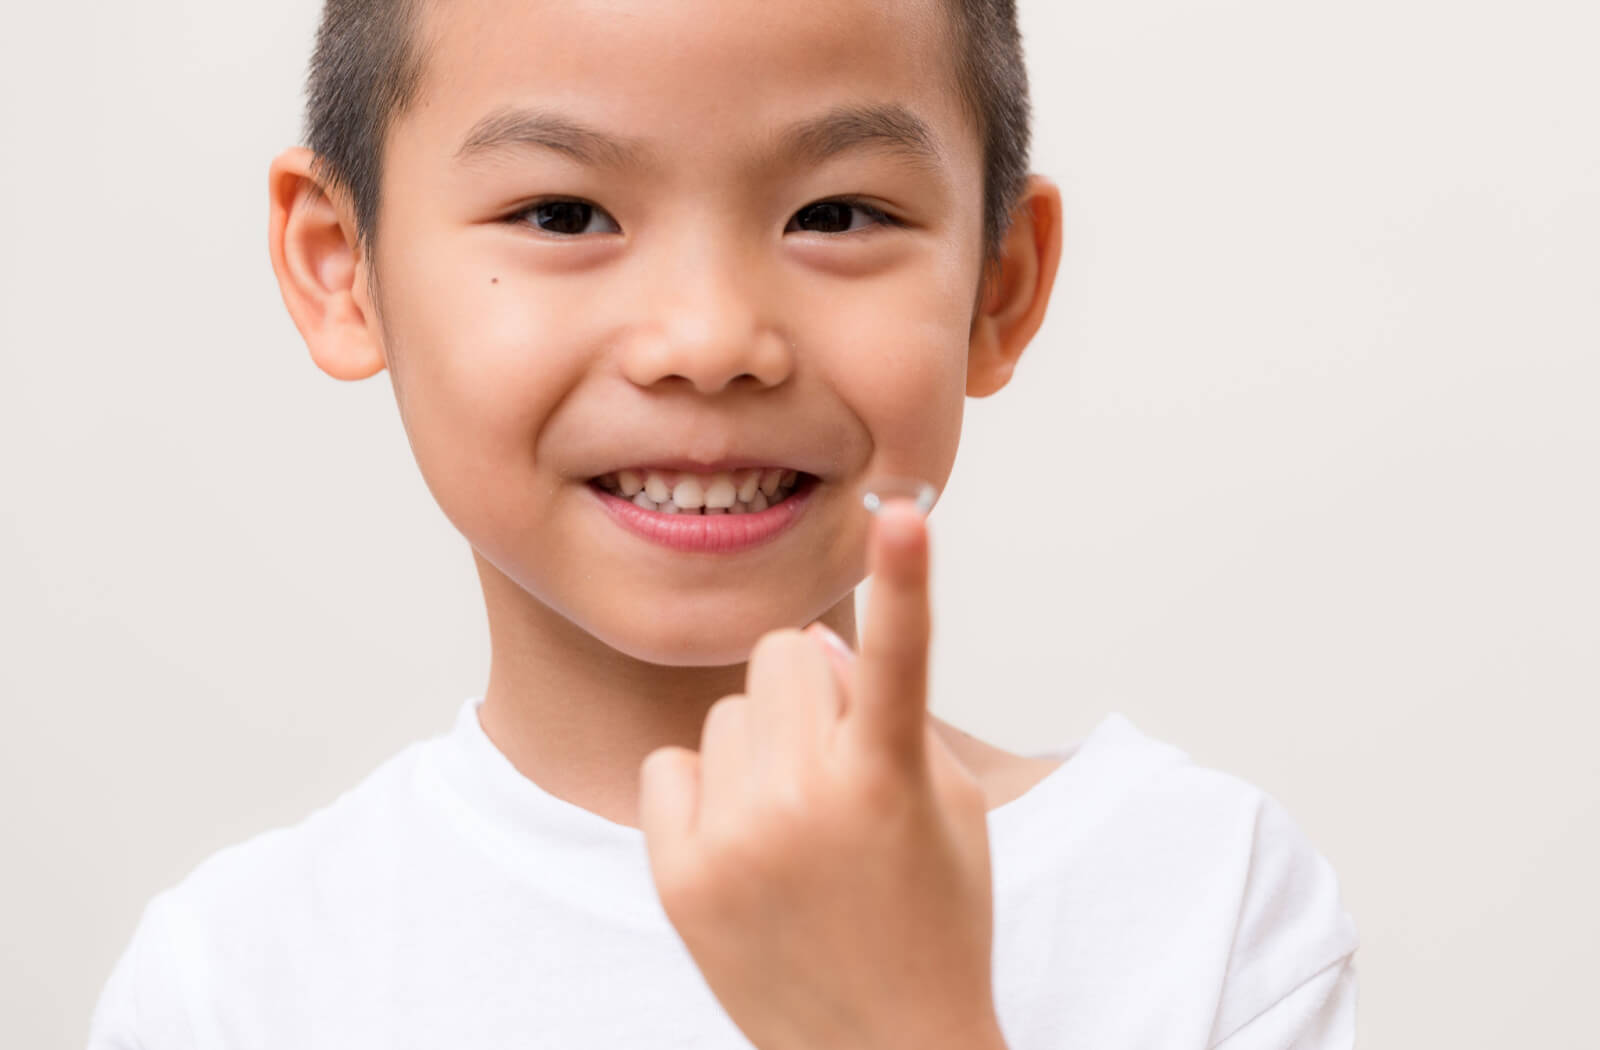 A male kid in a white is smiling and holding a contact lens on the tip of his finger.